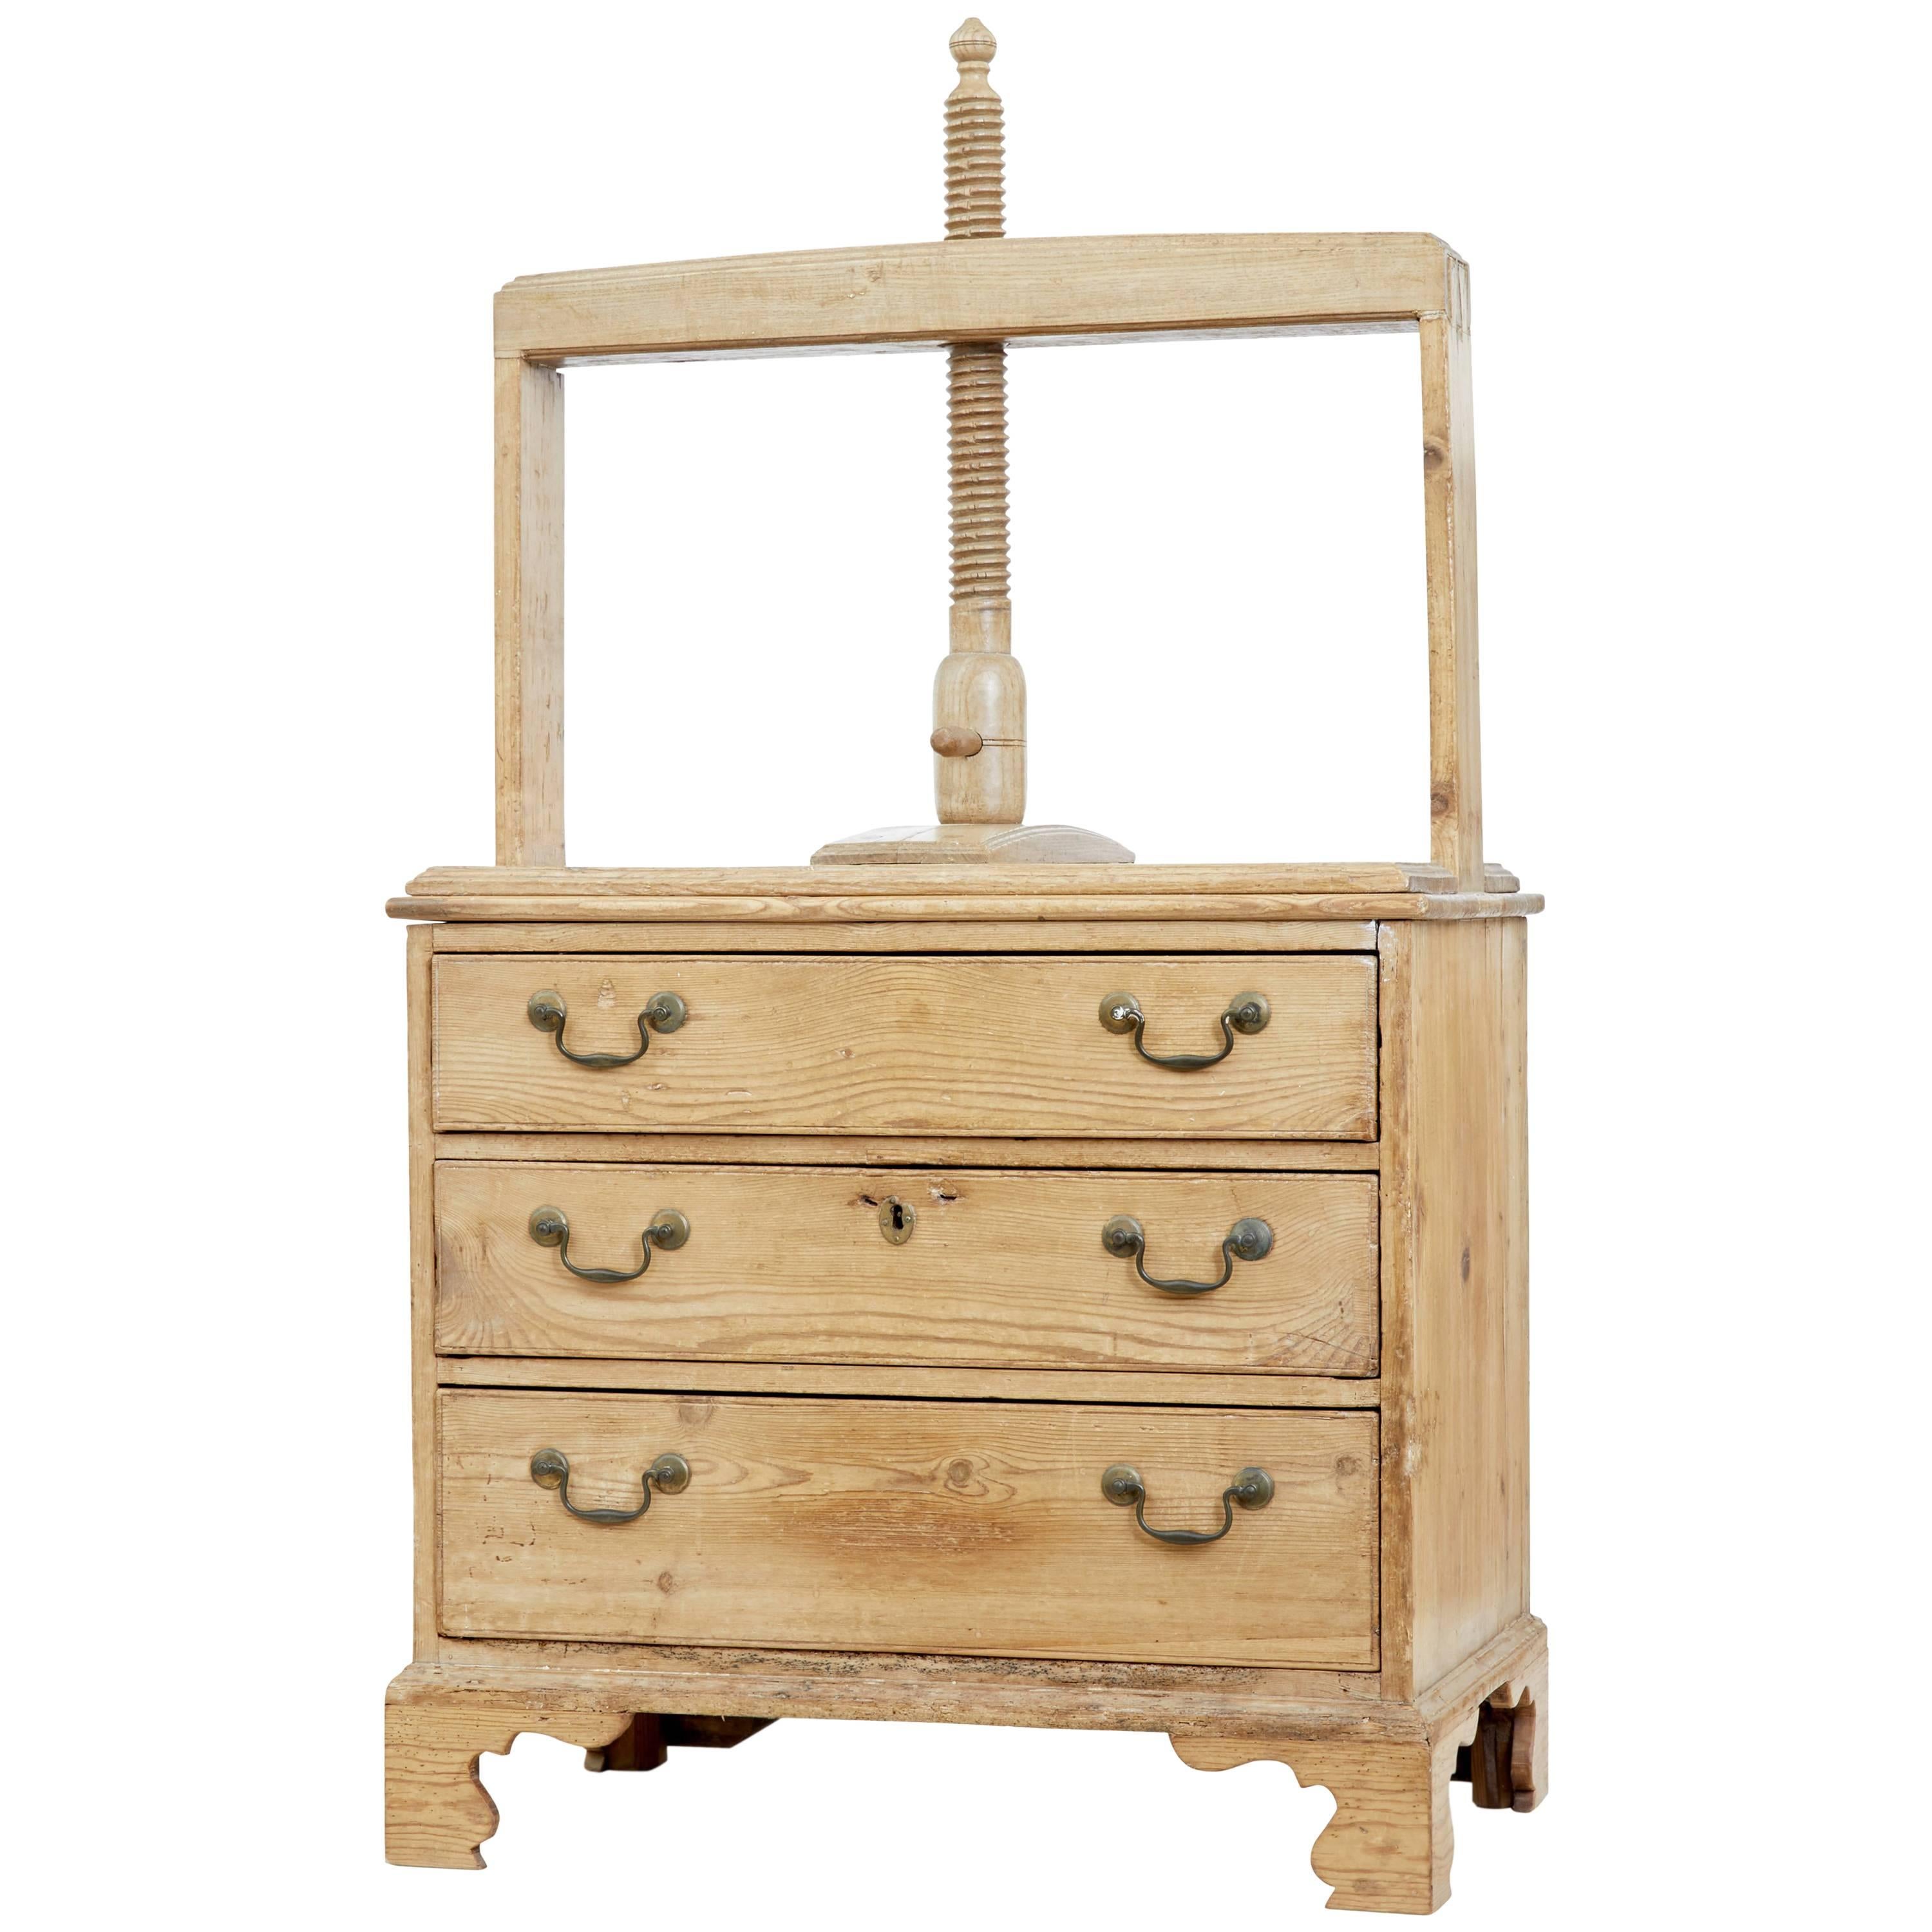 18th century pine book press chest of drawers